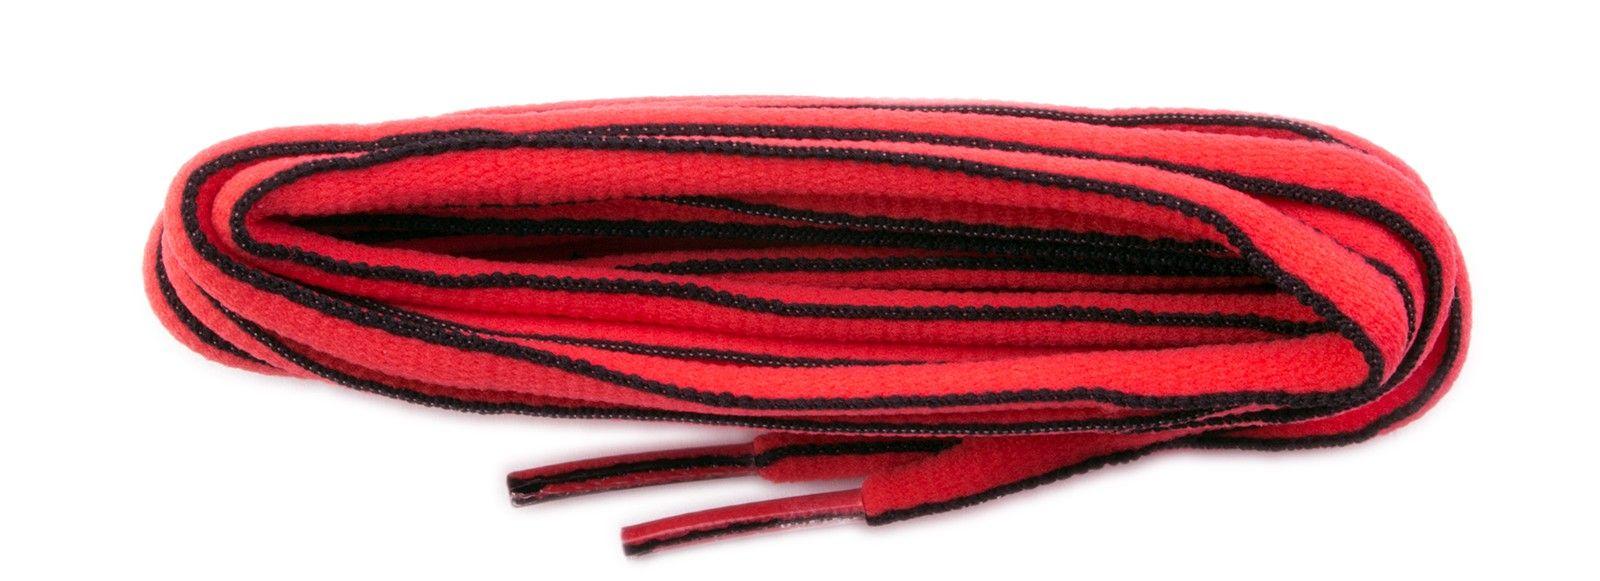 Red Oval Sports Logo - Red Black Edge Oval Sports Laces. Victor De Banke